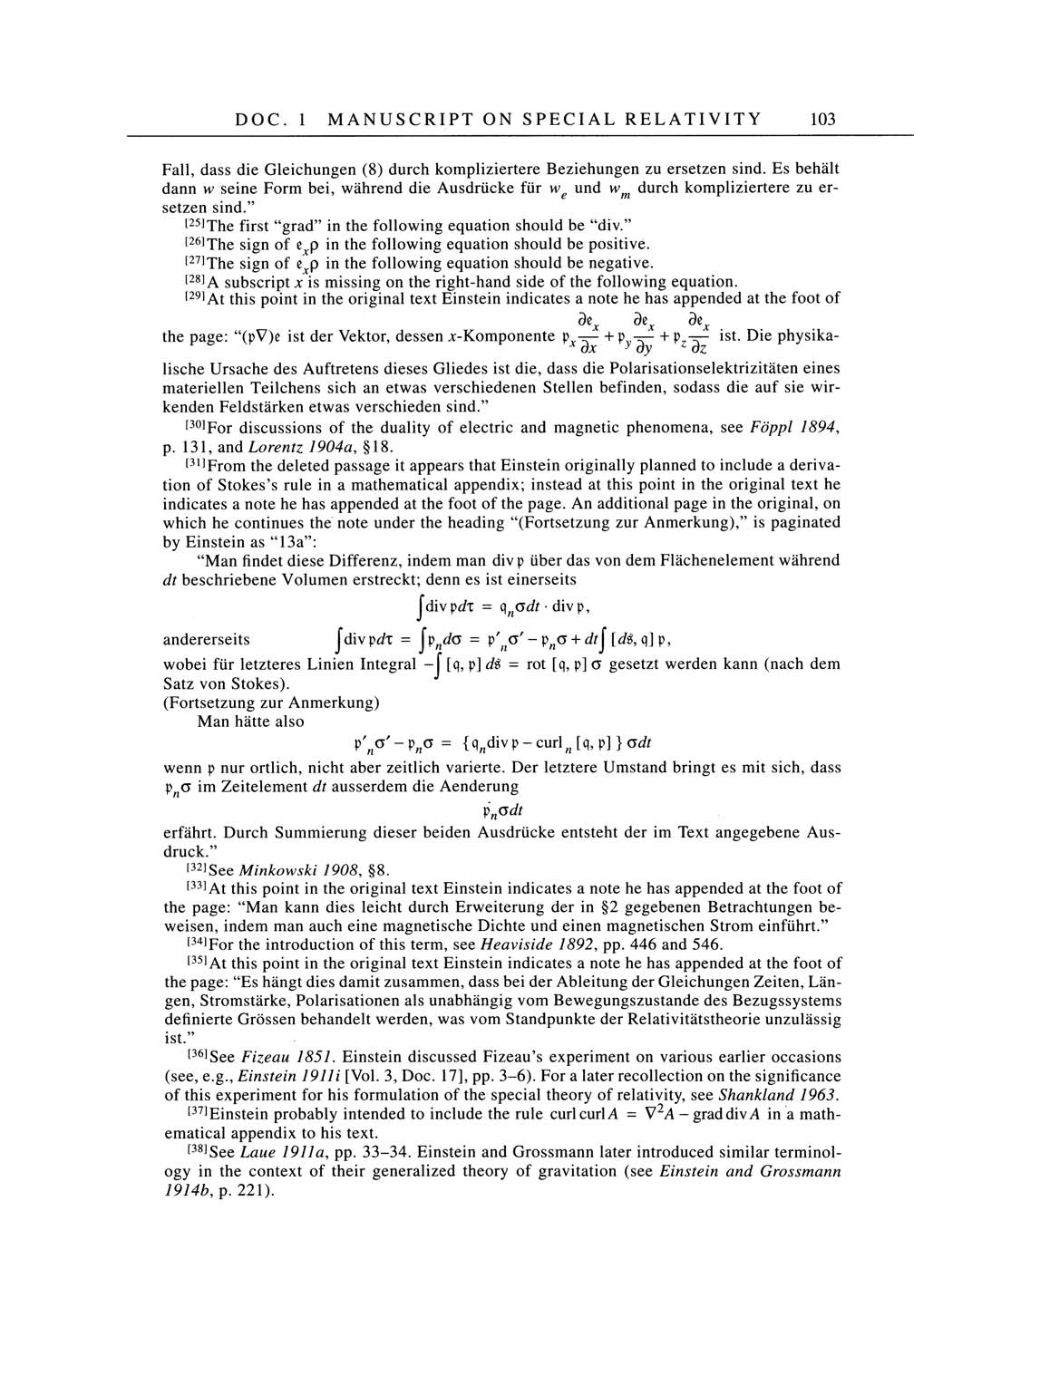 Volume 4: The Swiss Years: Writings 1912-1914 page 103